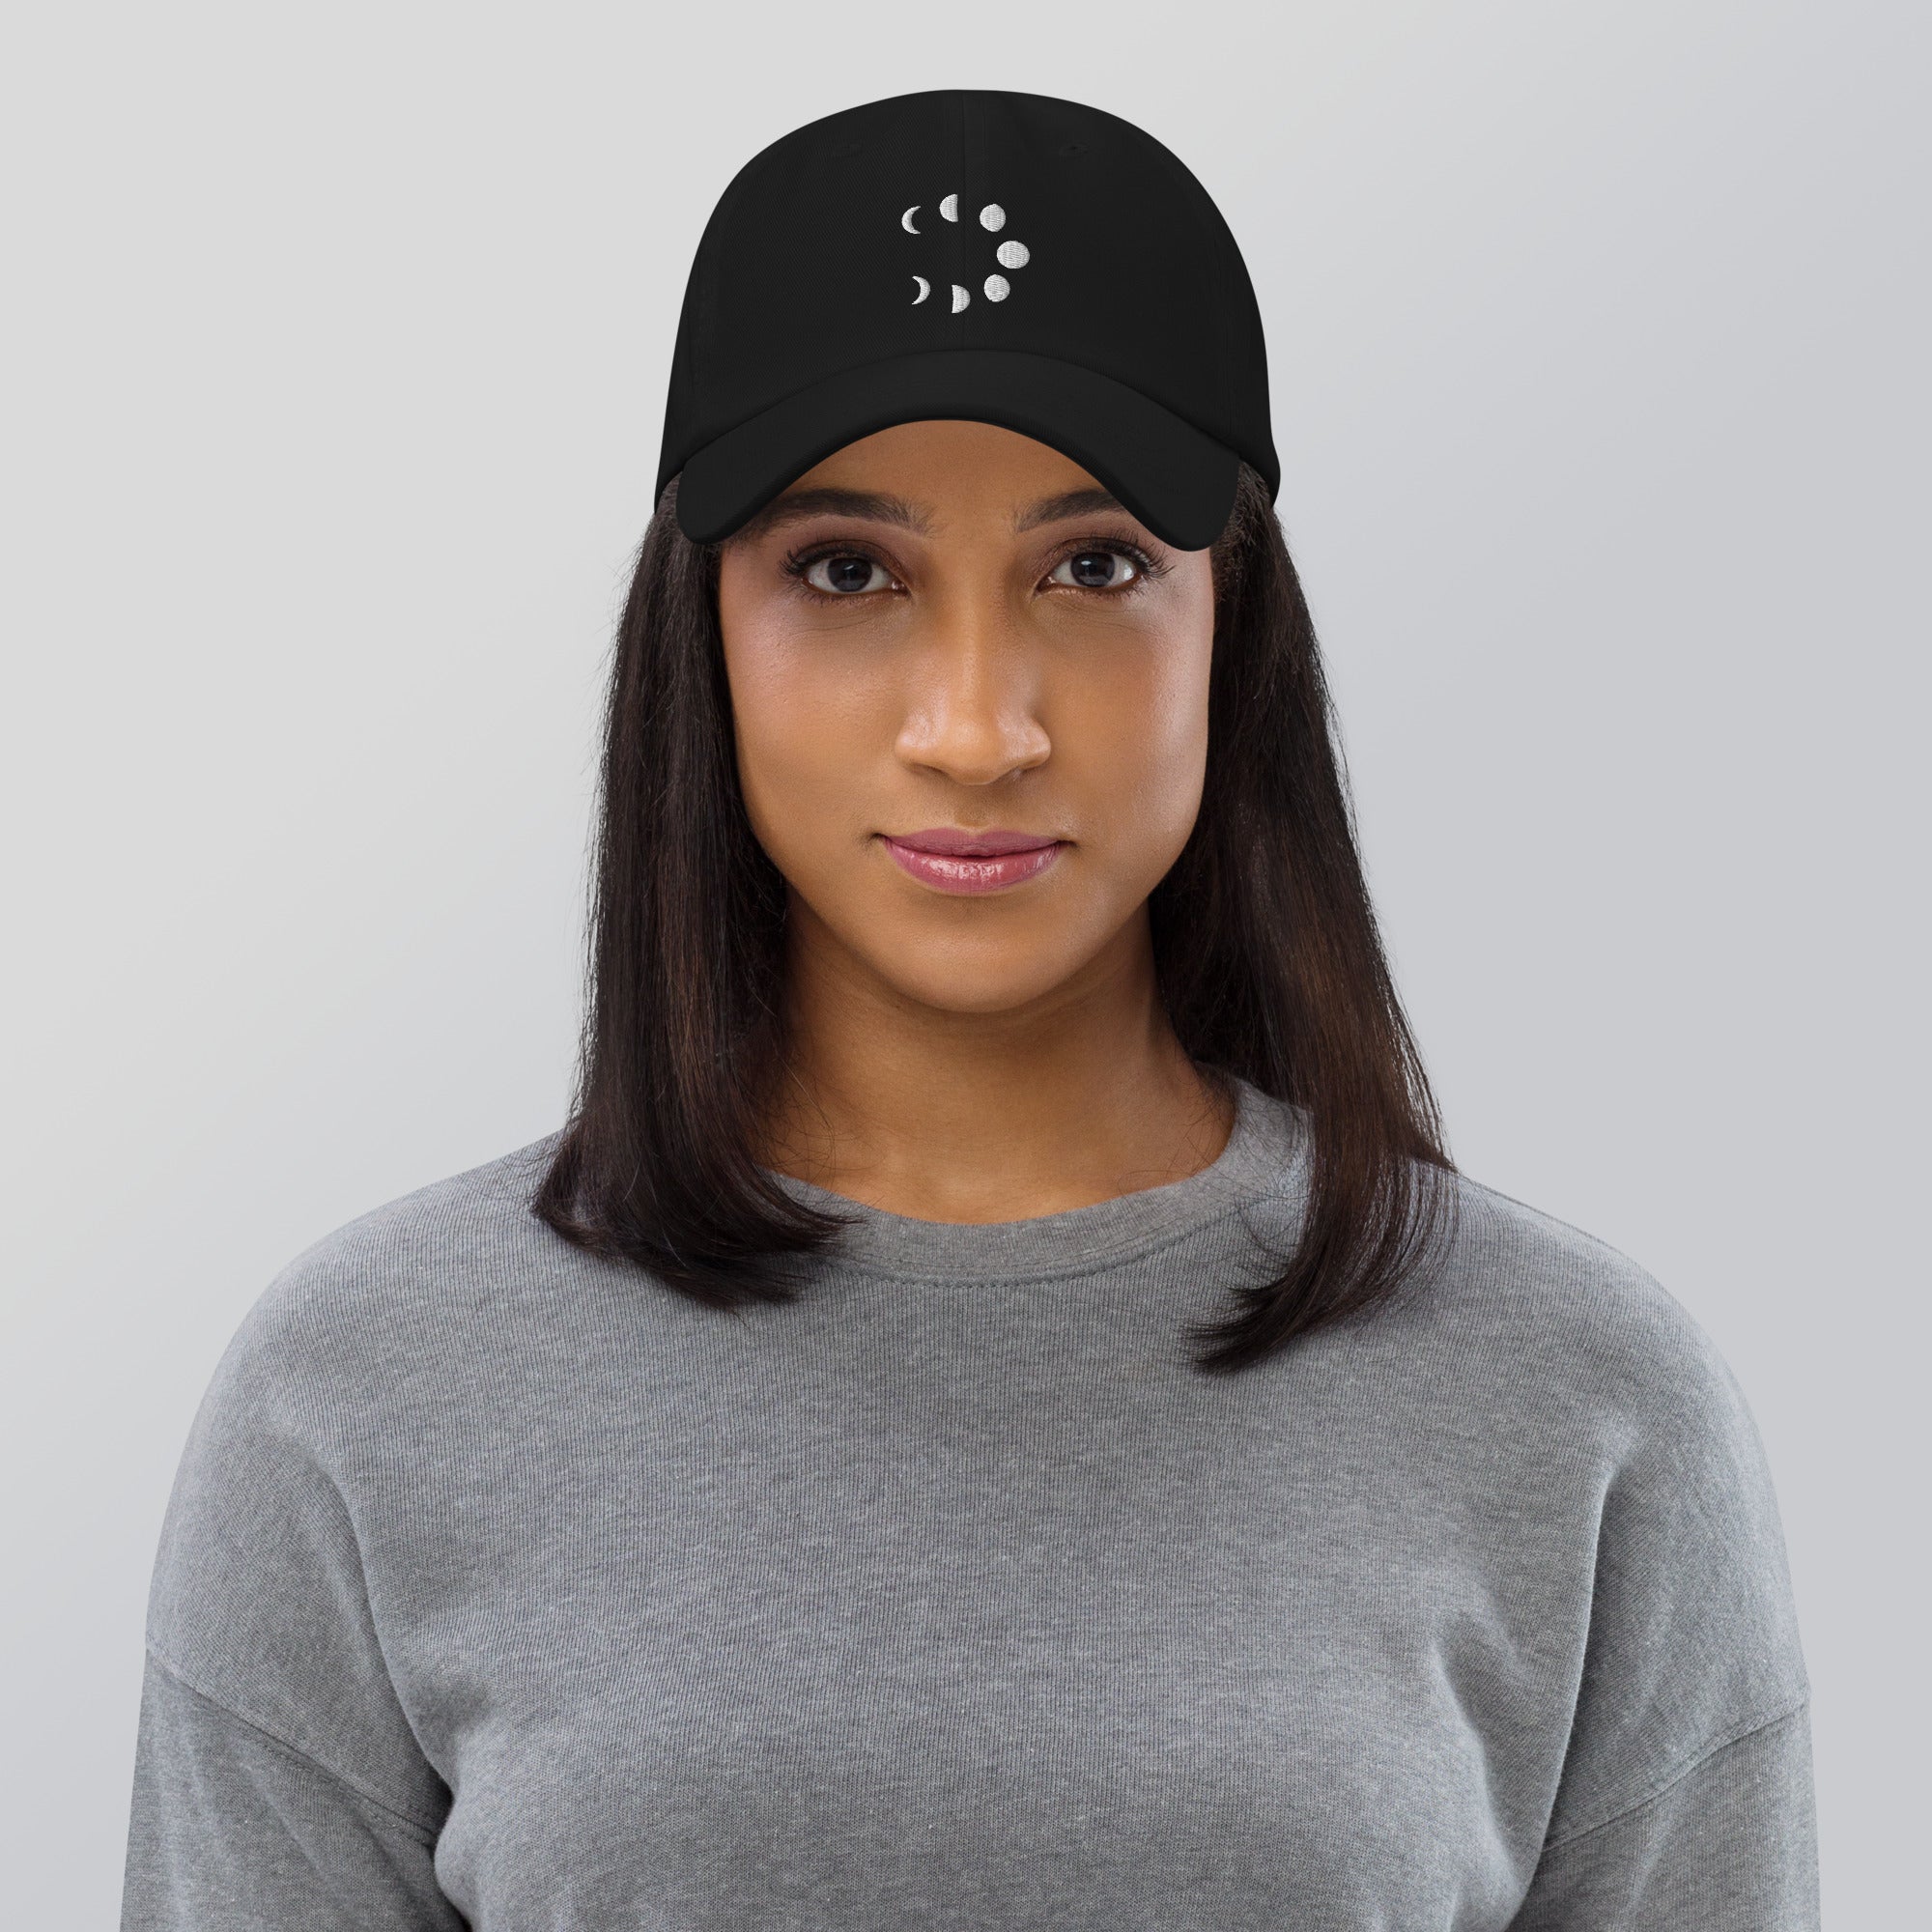 Lunar Moon Phases Embroidered Baseball Cap Dad hat - Edge of Life Designs